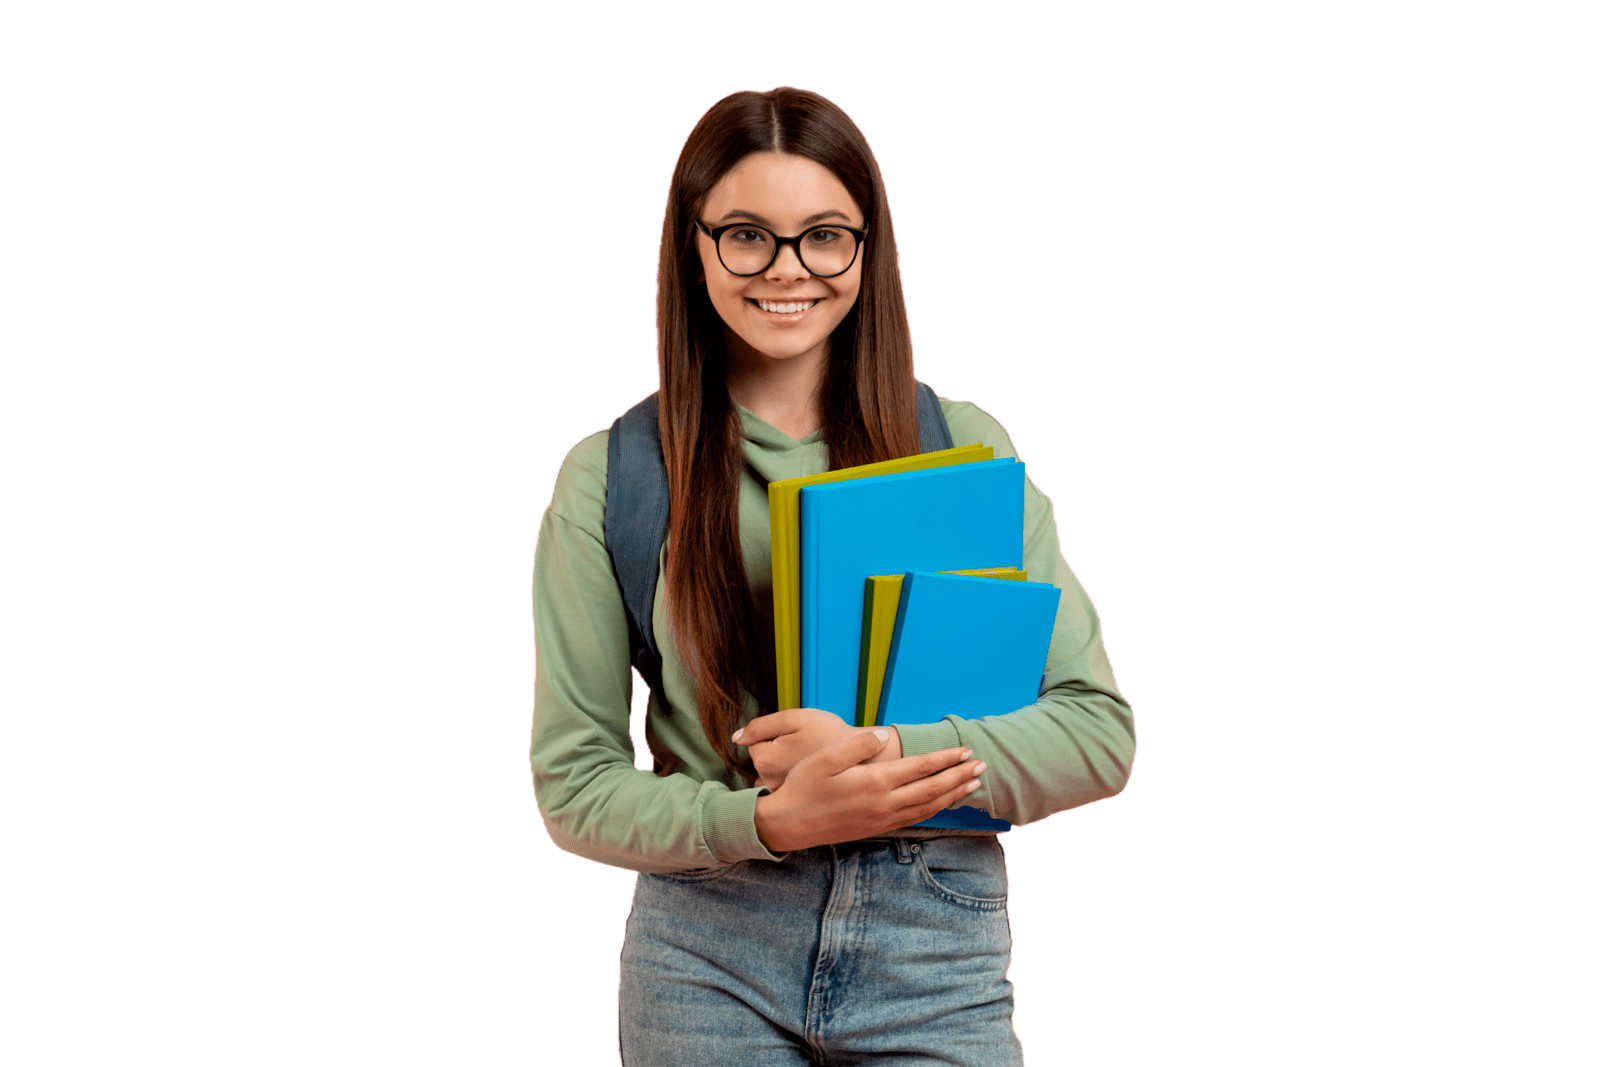 student eith glasses smiling holding books